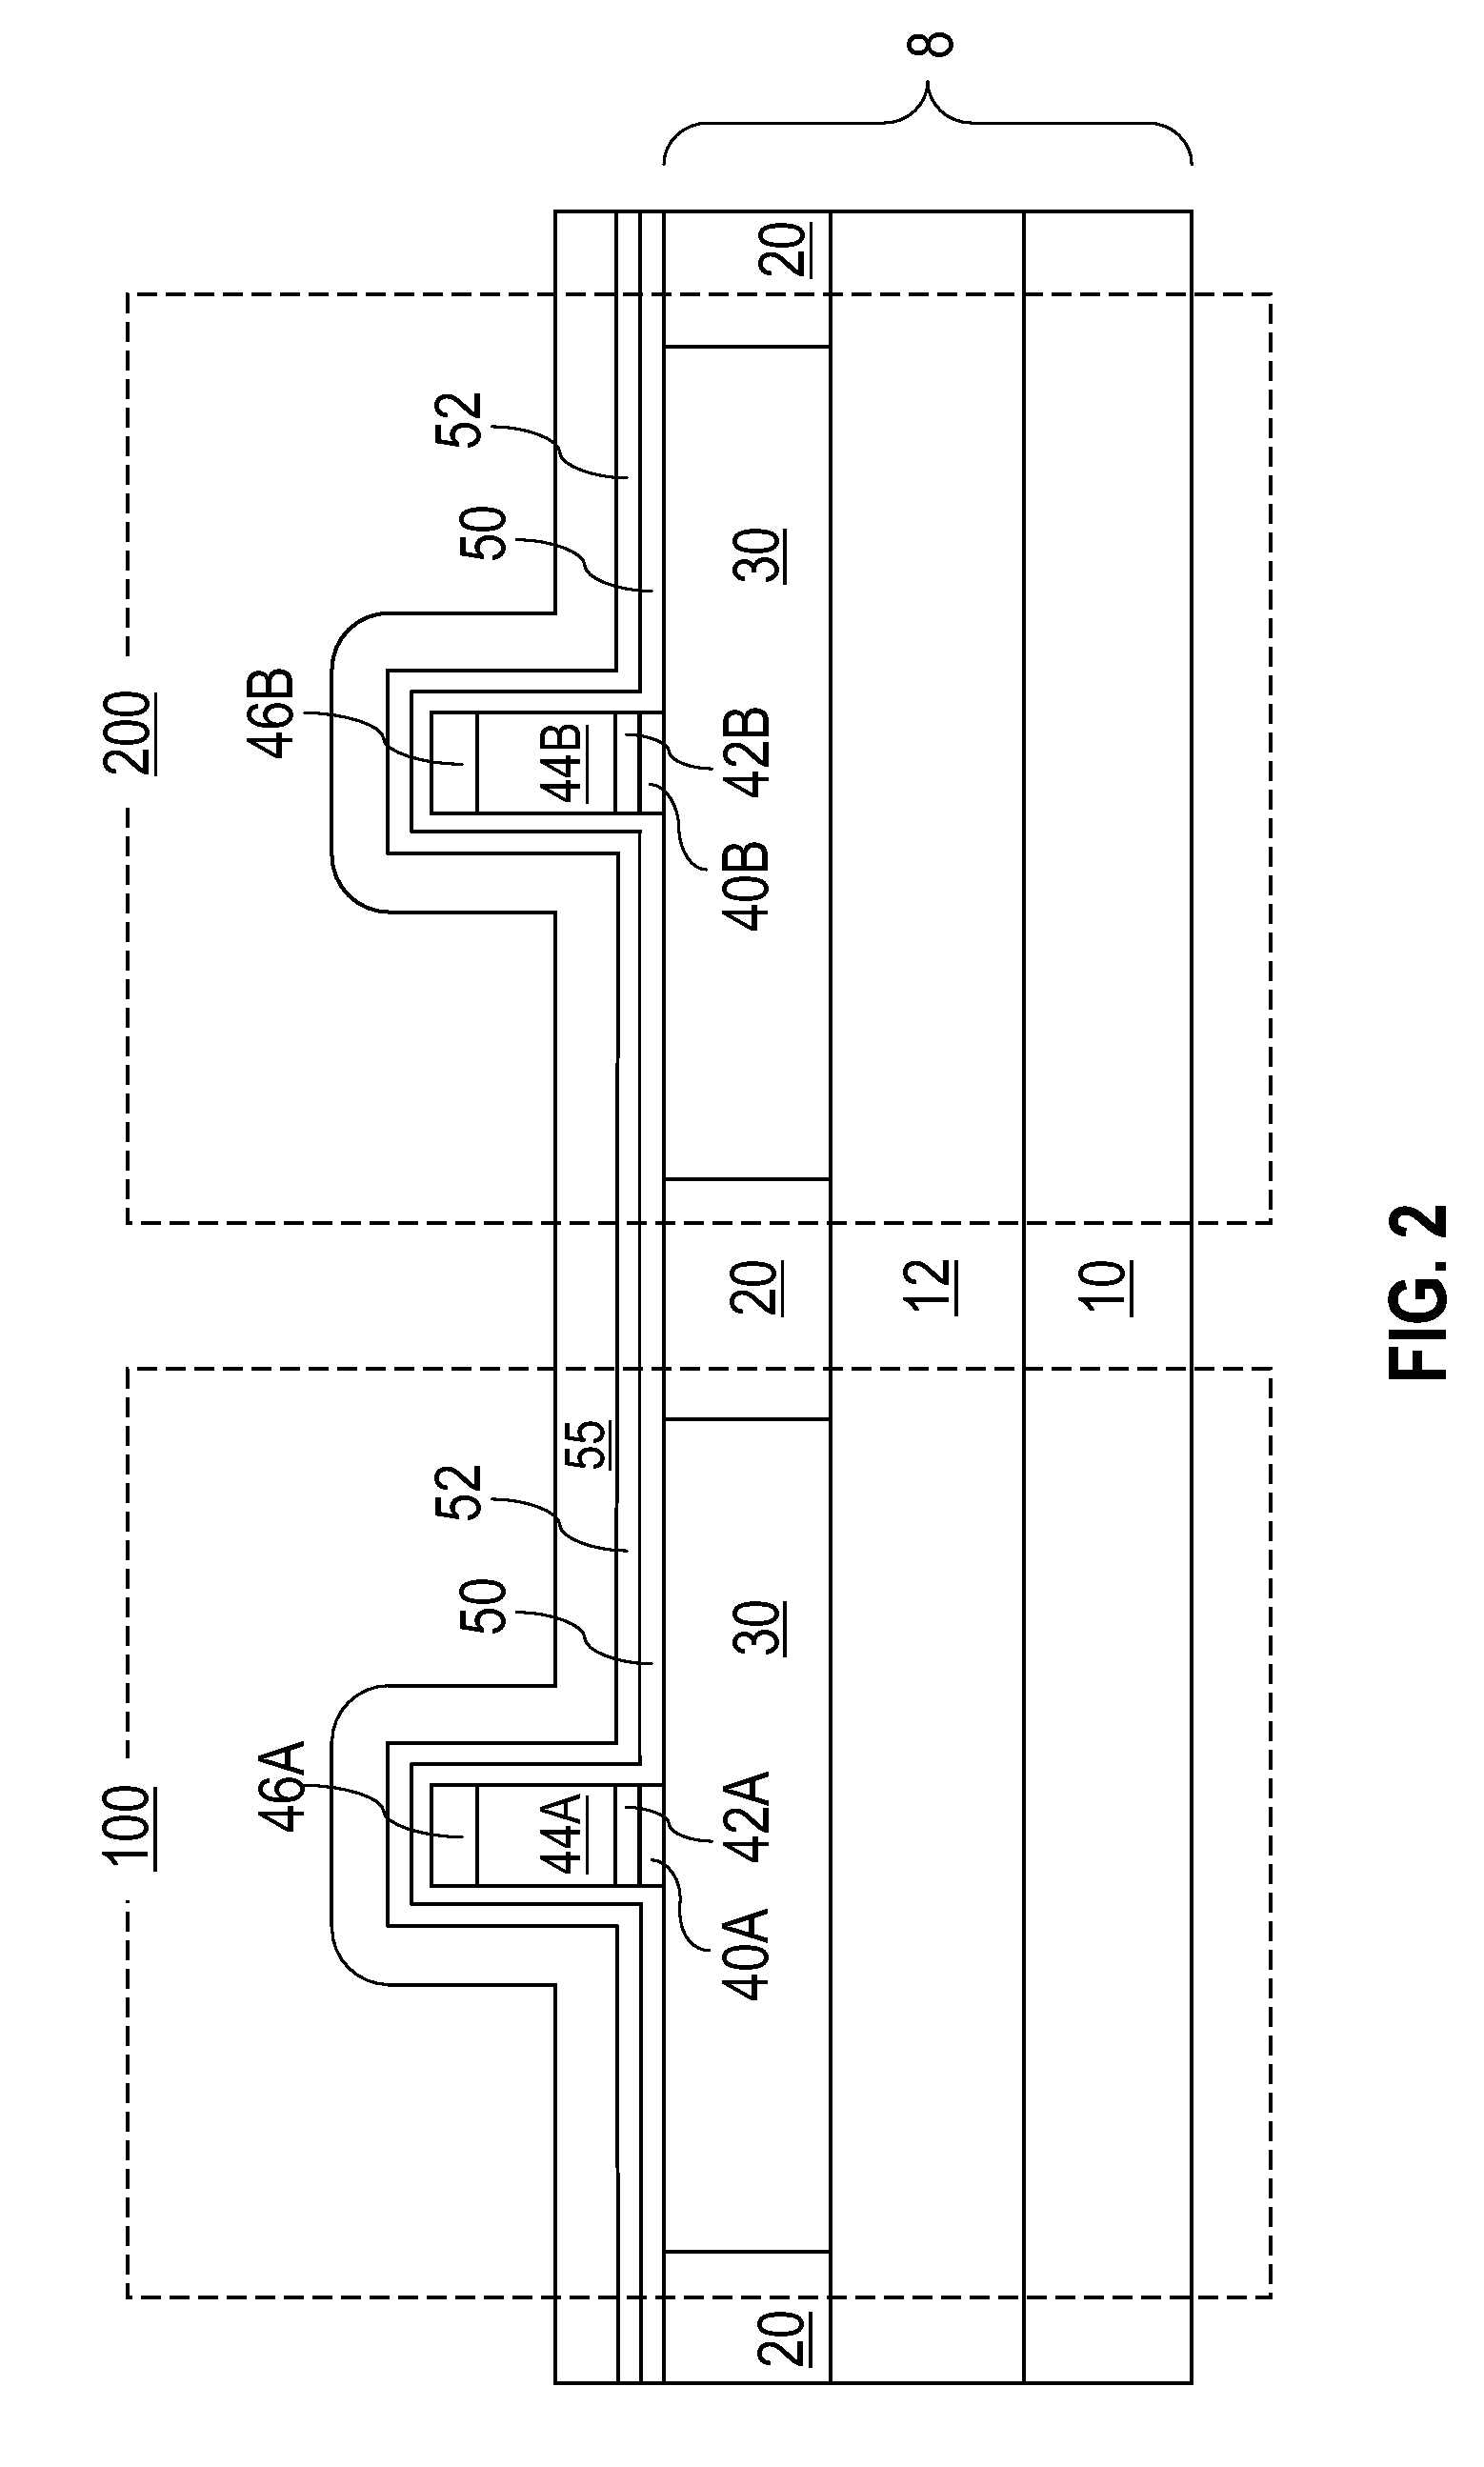 CMOS transistors with differential oxygen content high-k dielectrics